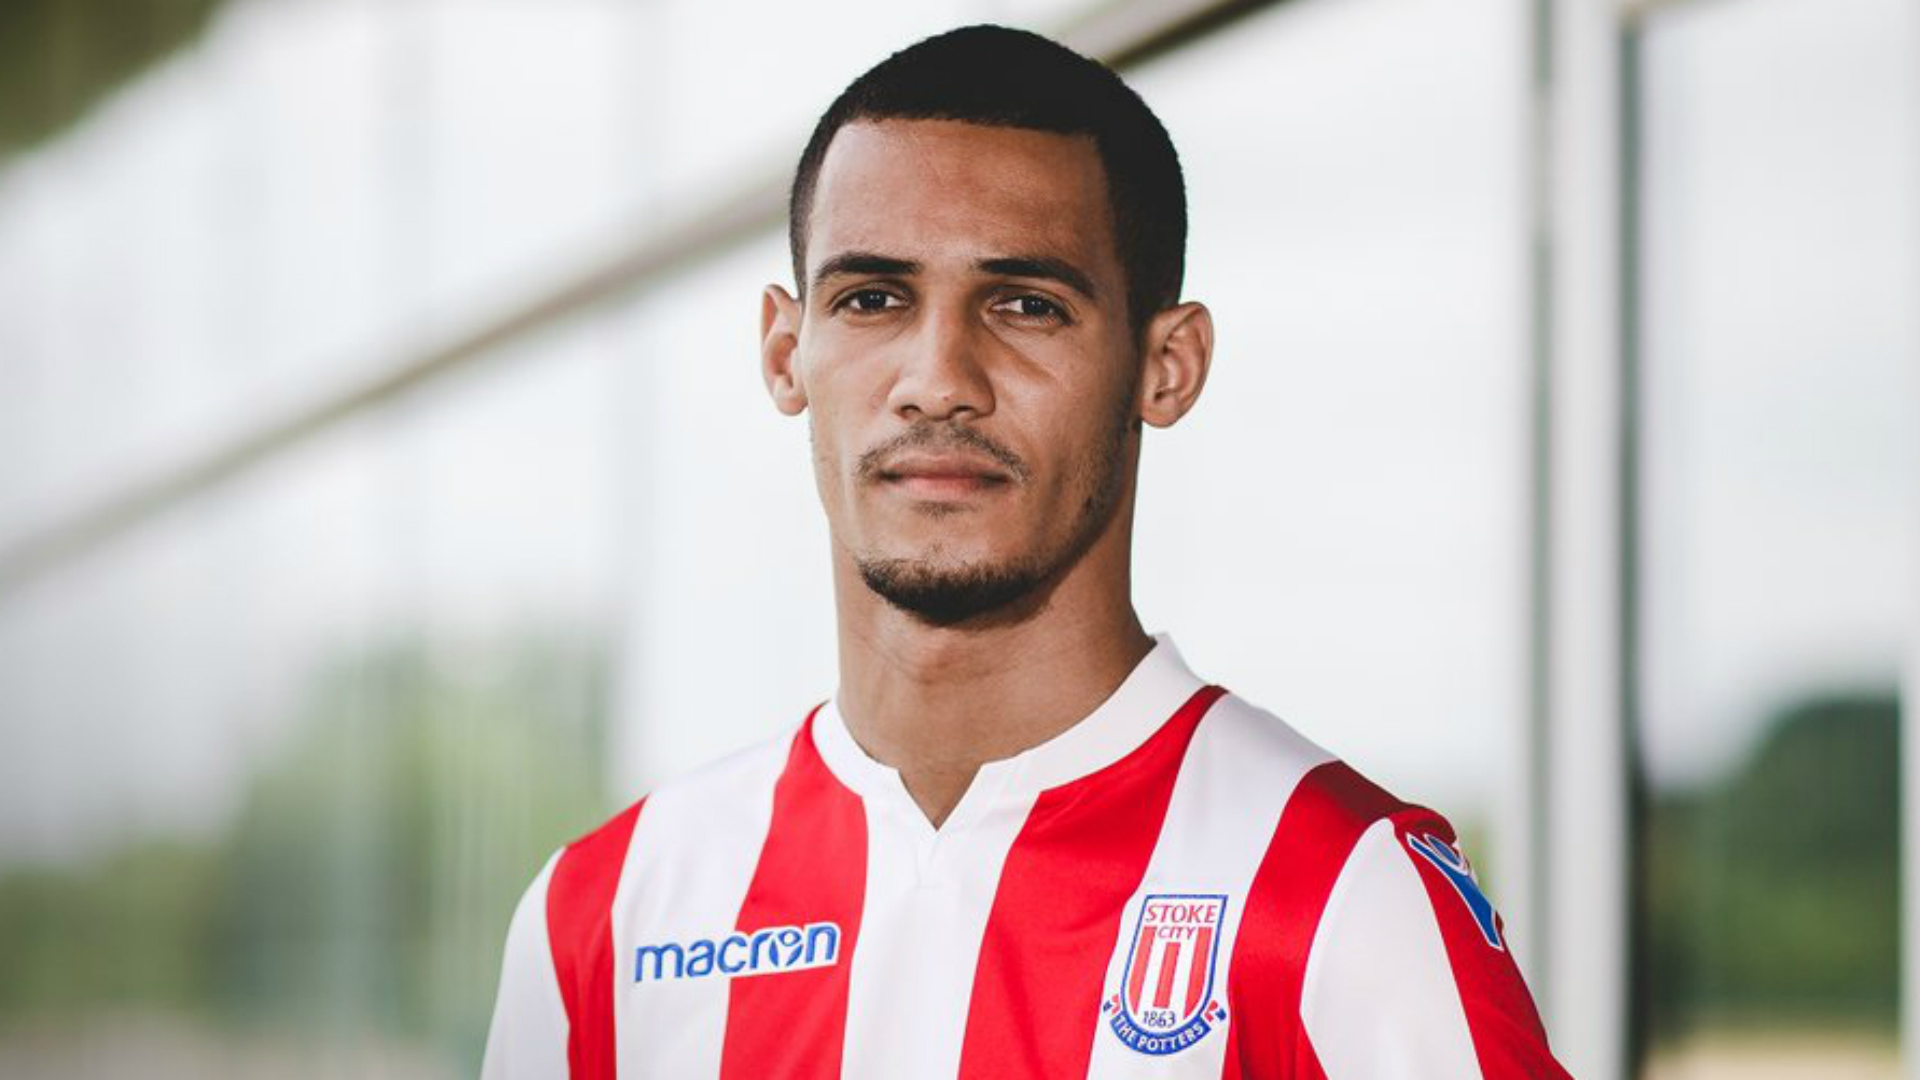 Stoke sign Ince from Huddersfield in £12m deal